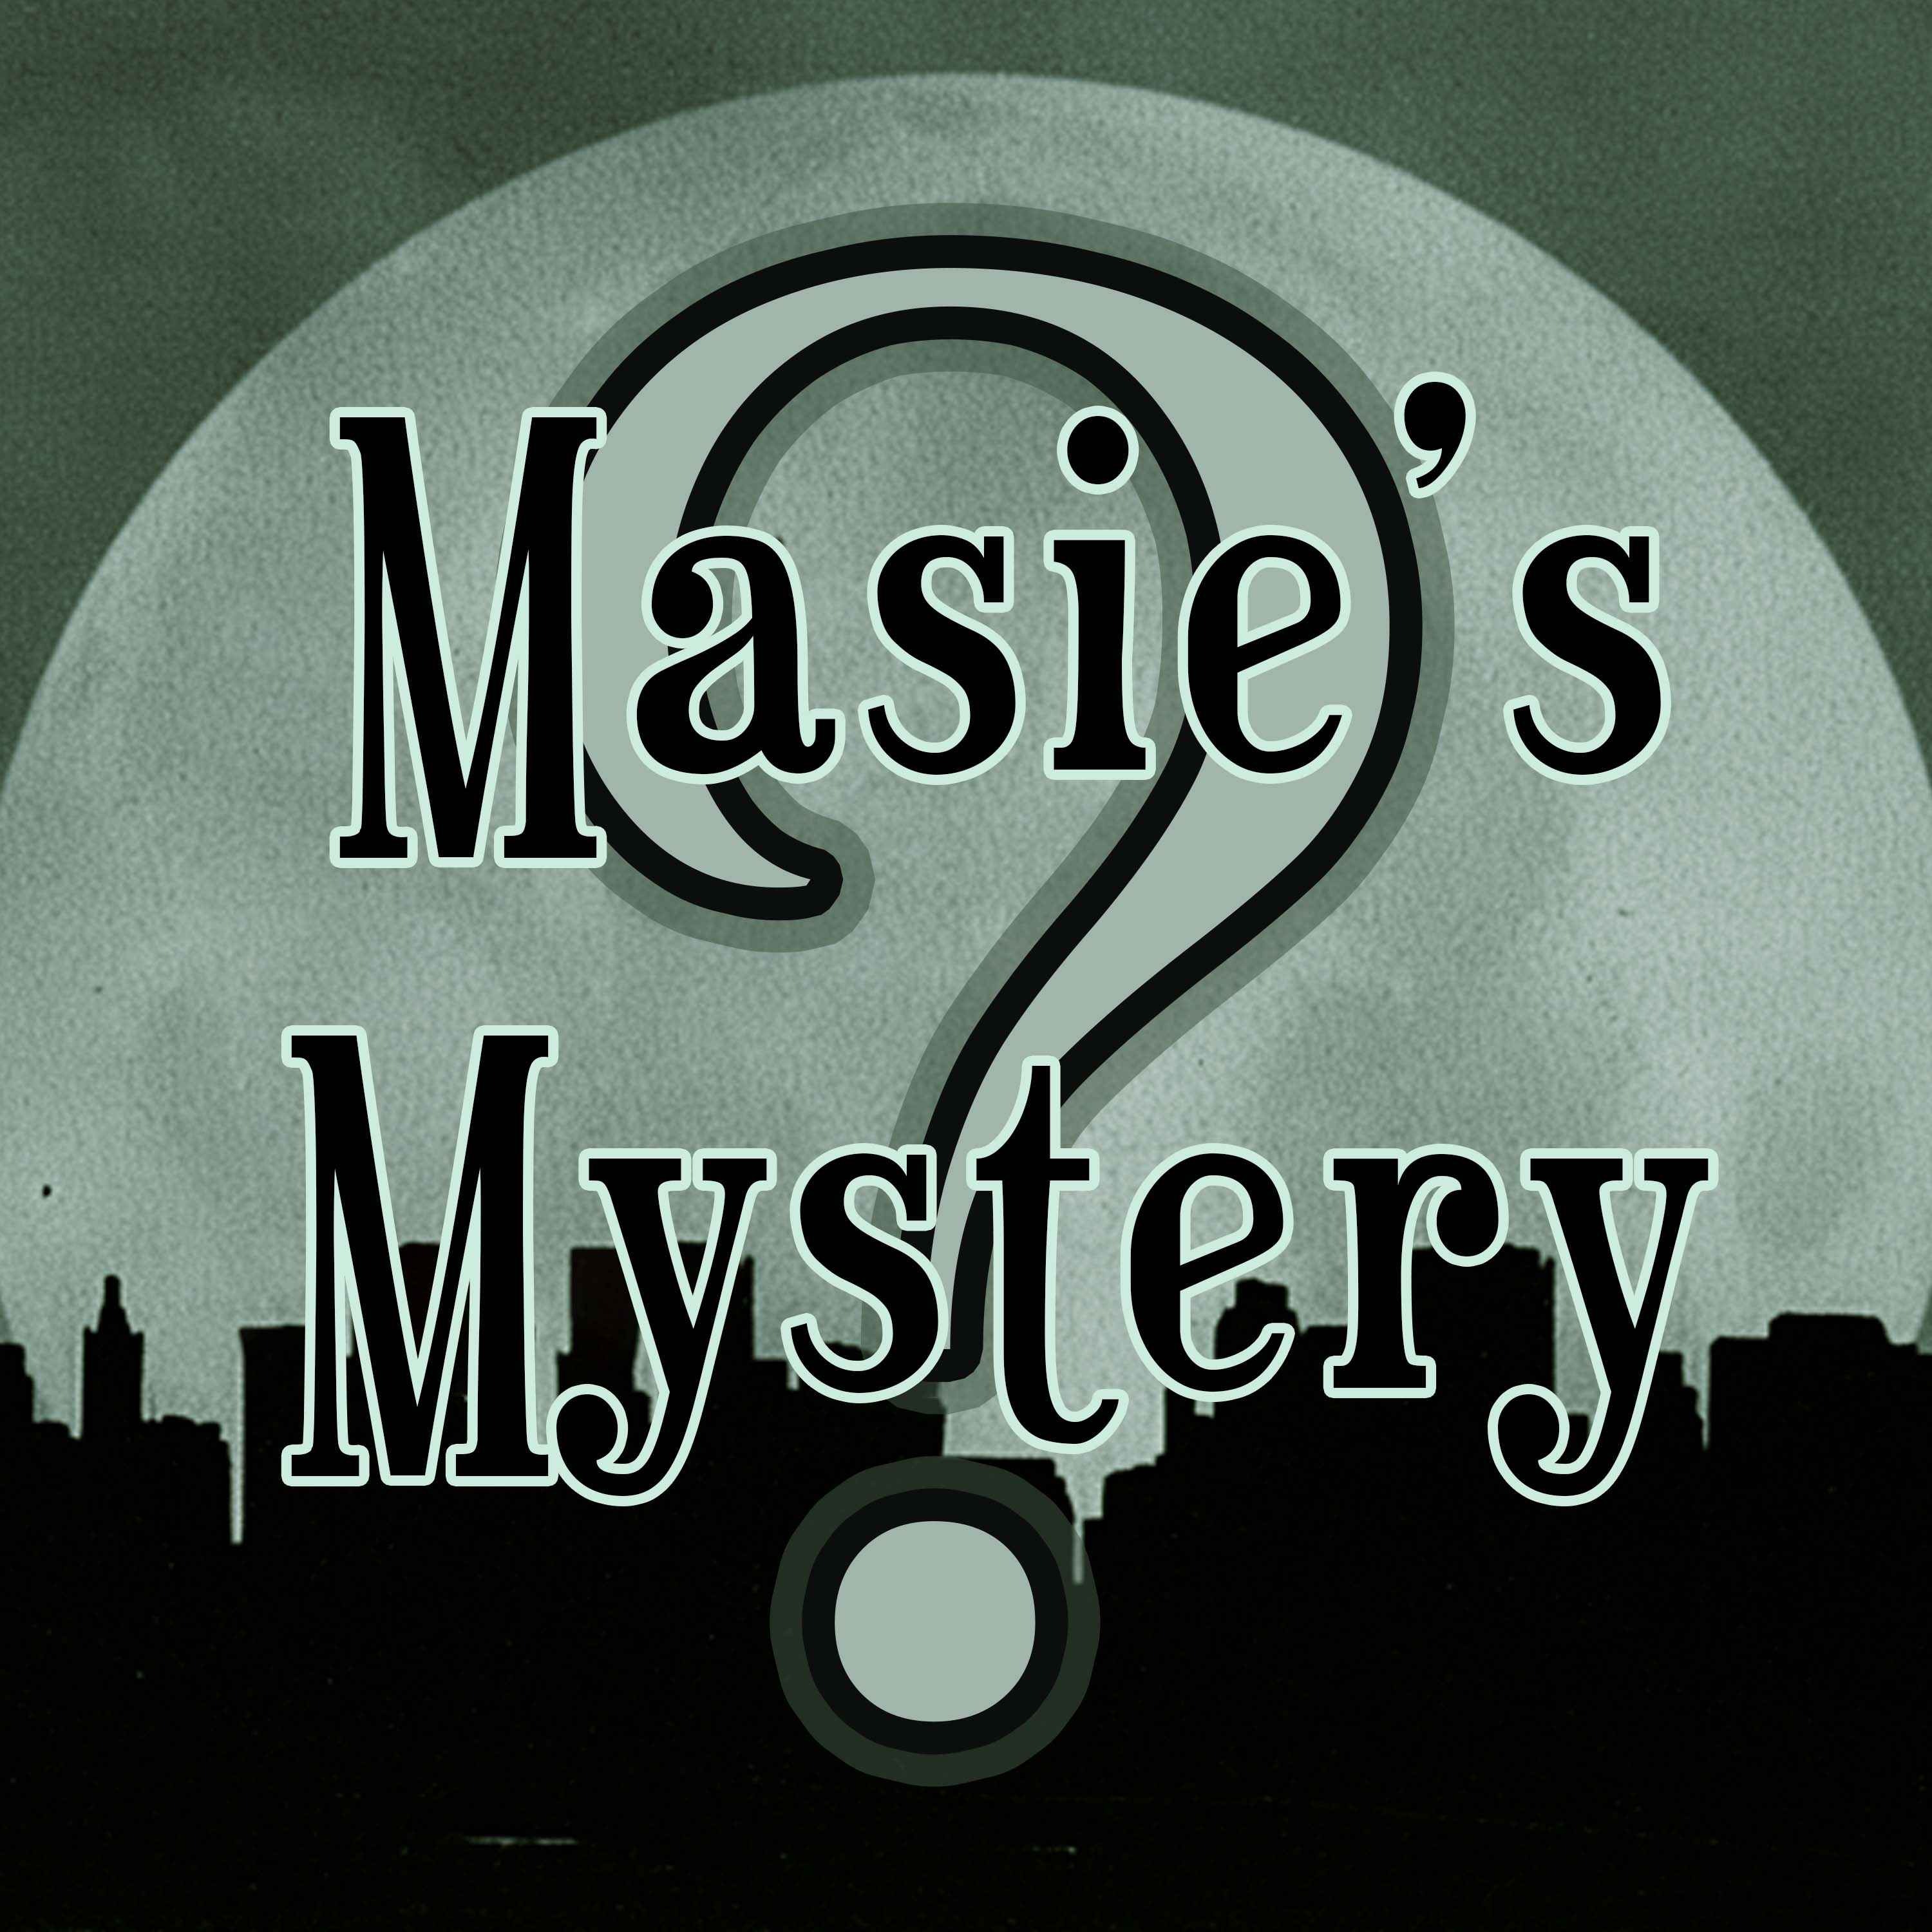 Masie's Mystery - The Baked Epitaph